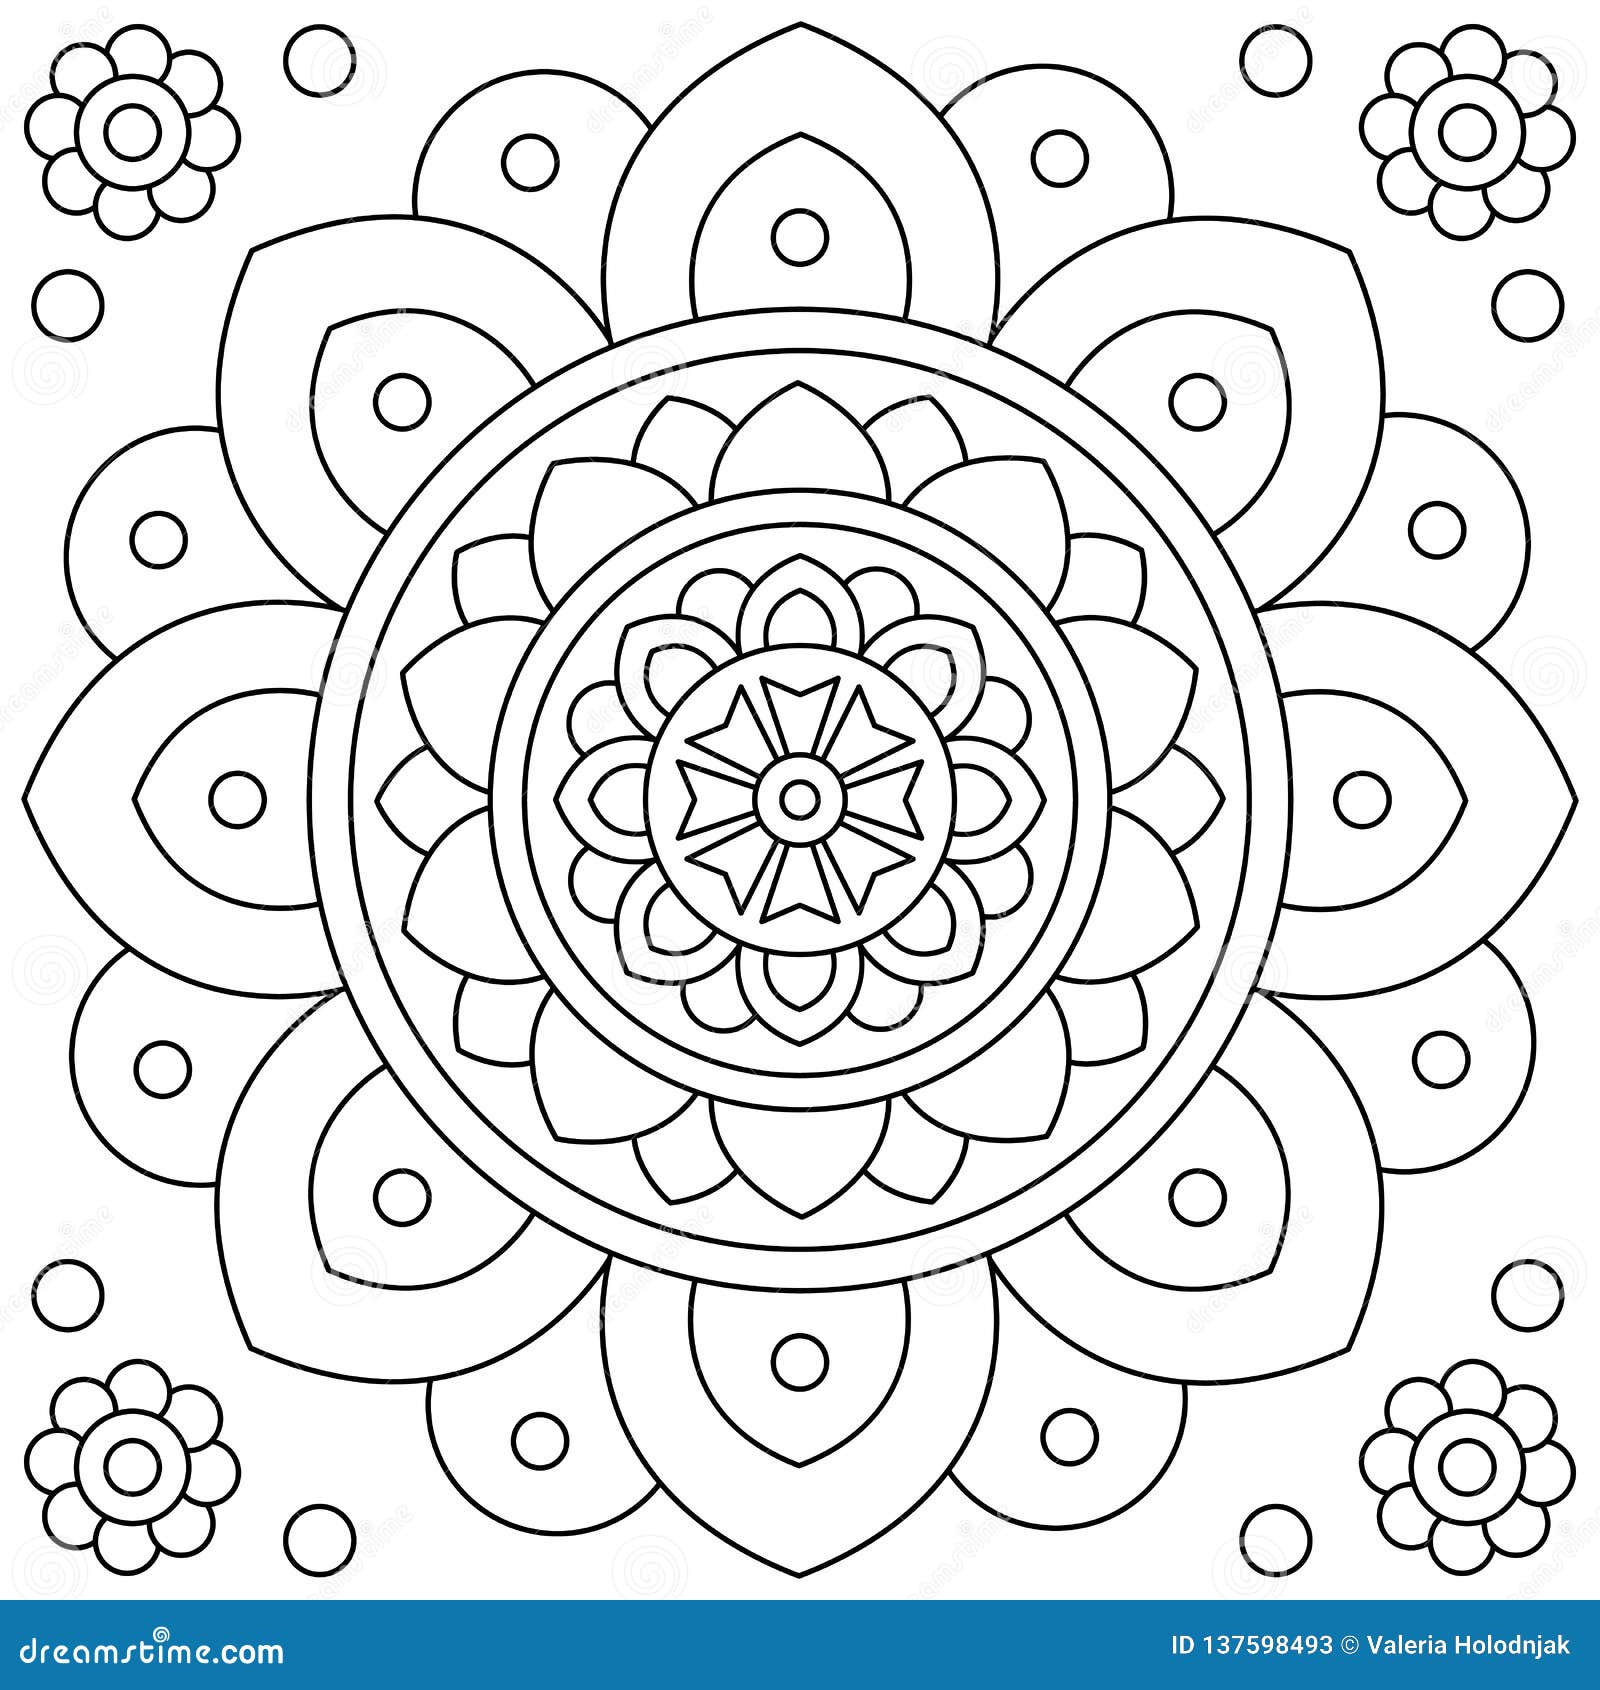 Mandala. Flower. Coloring Page. Black and White Vector ...